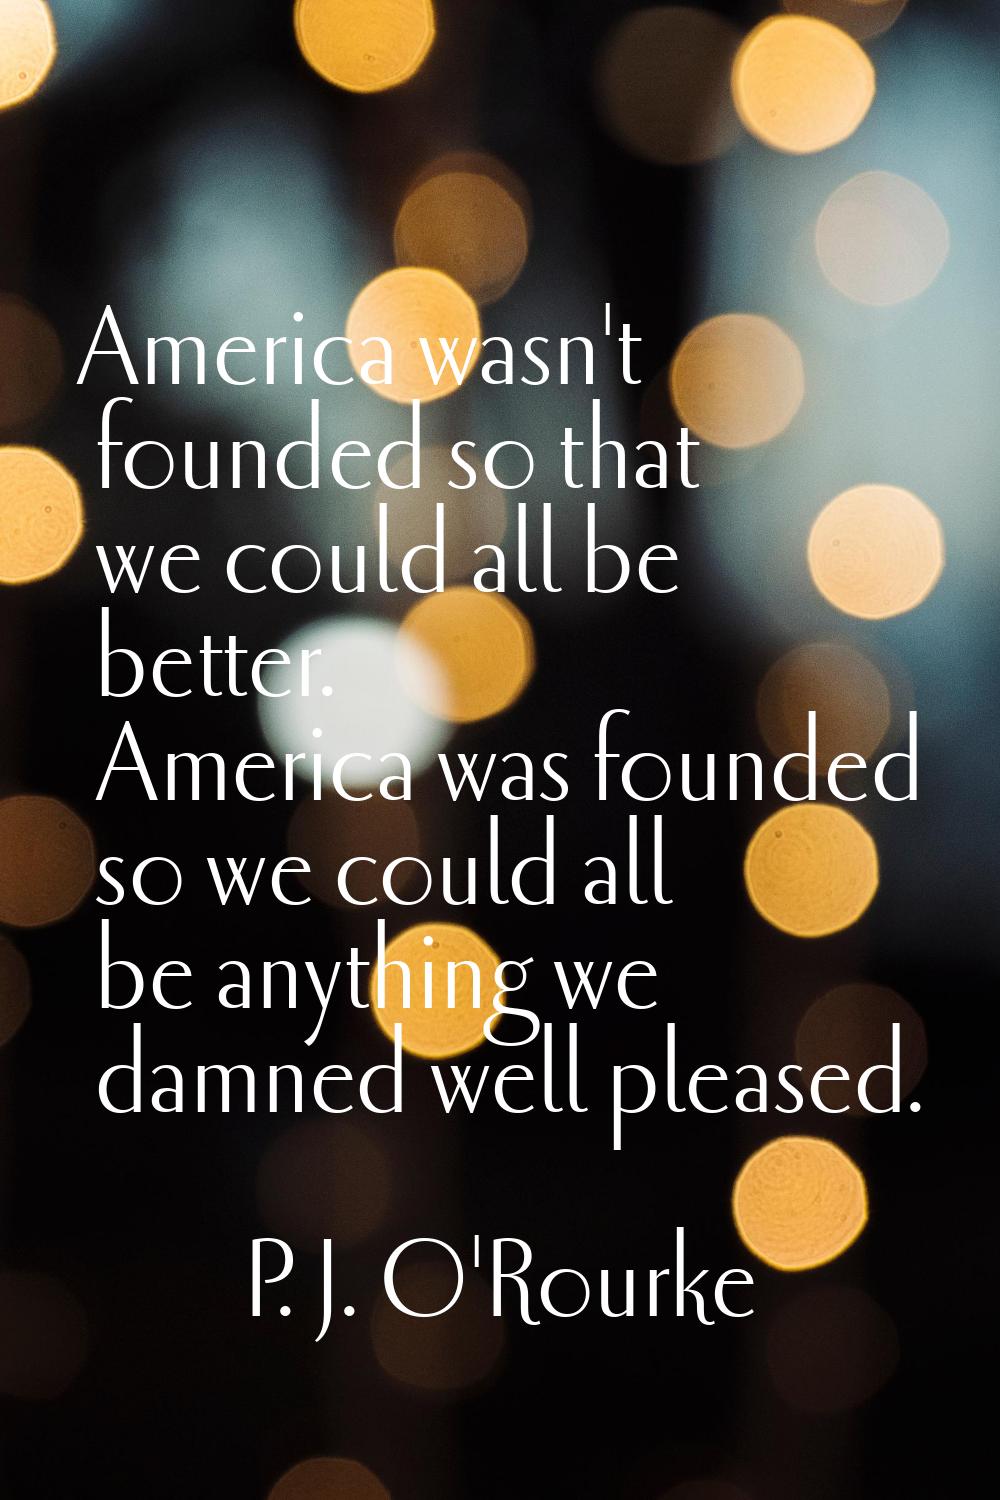 America wasn't founded so that we could all be better. America was founded so we could all be anyth